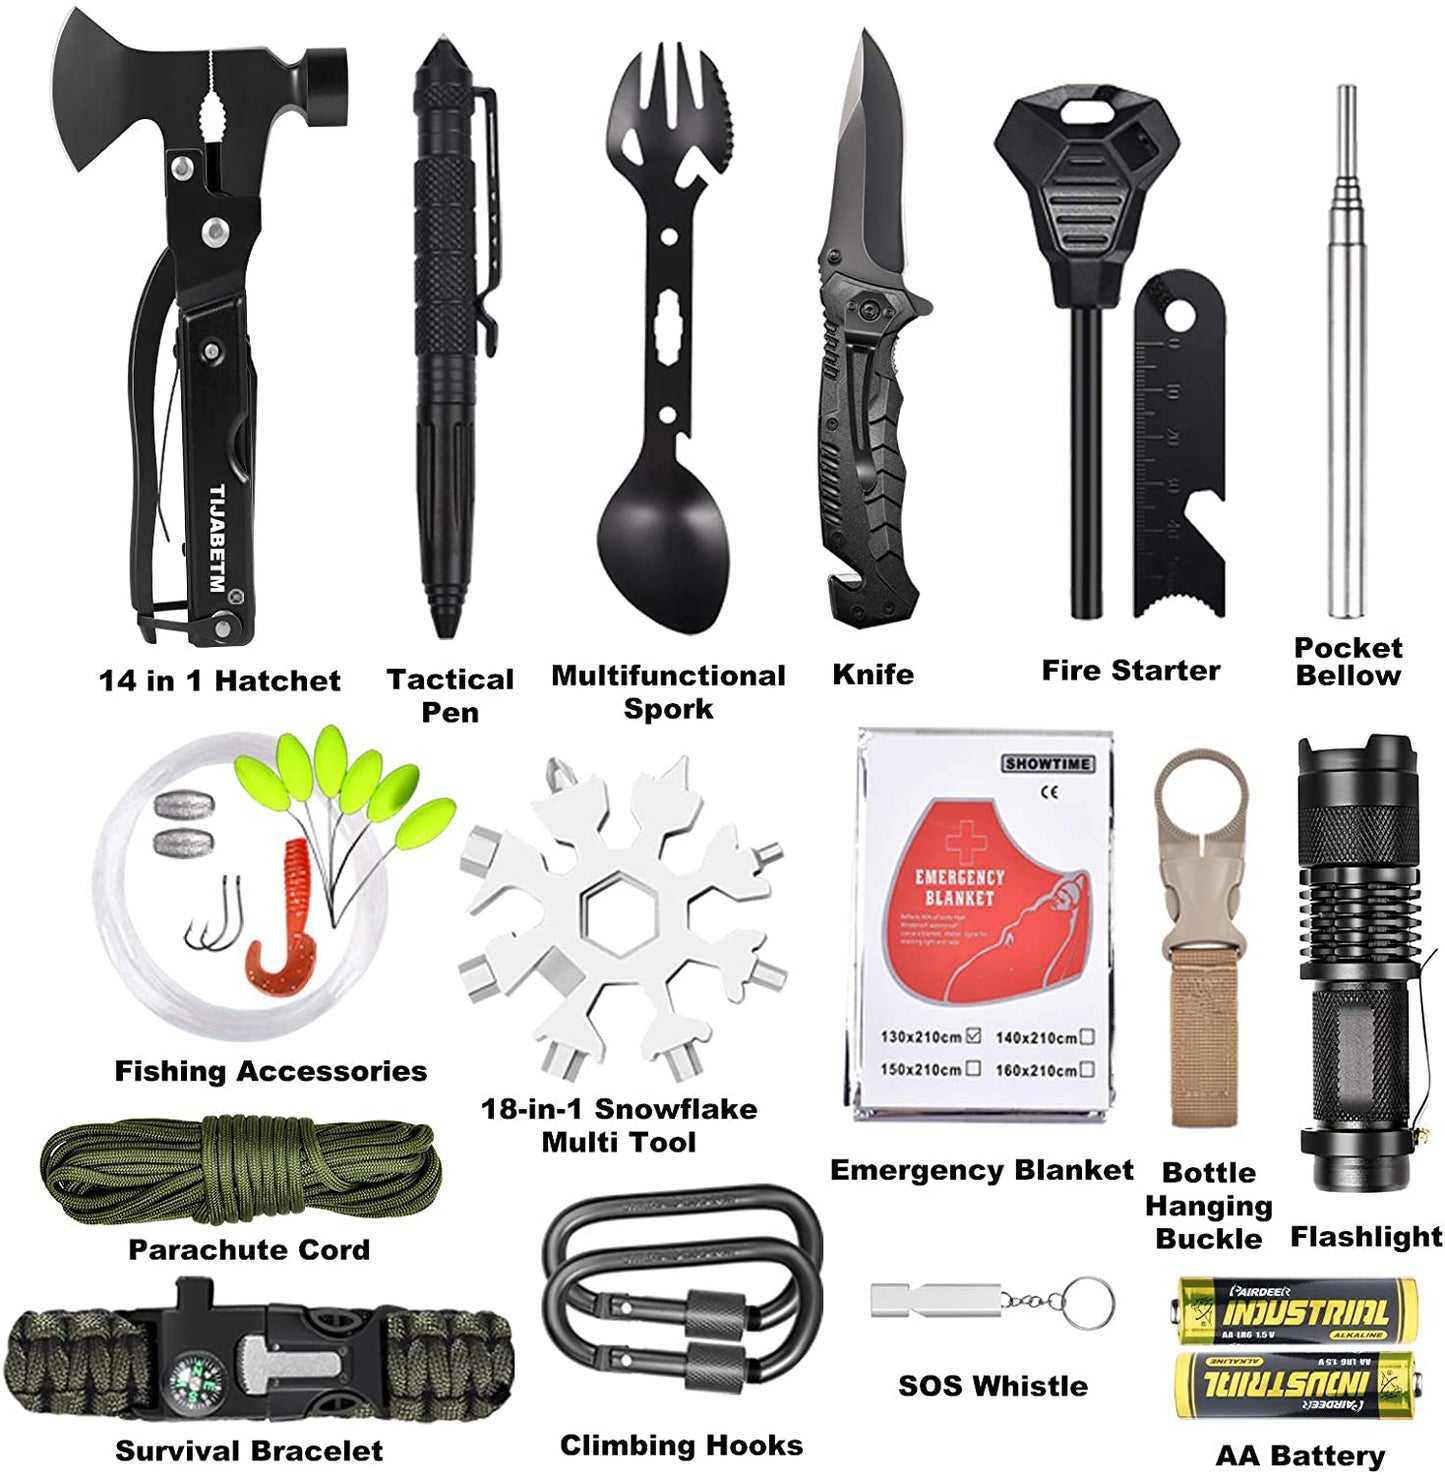 Survival kit for emergencies and outdoor adventures